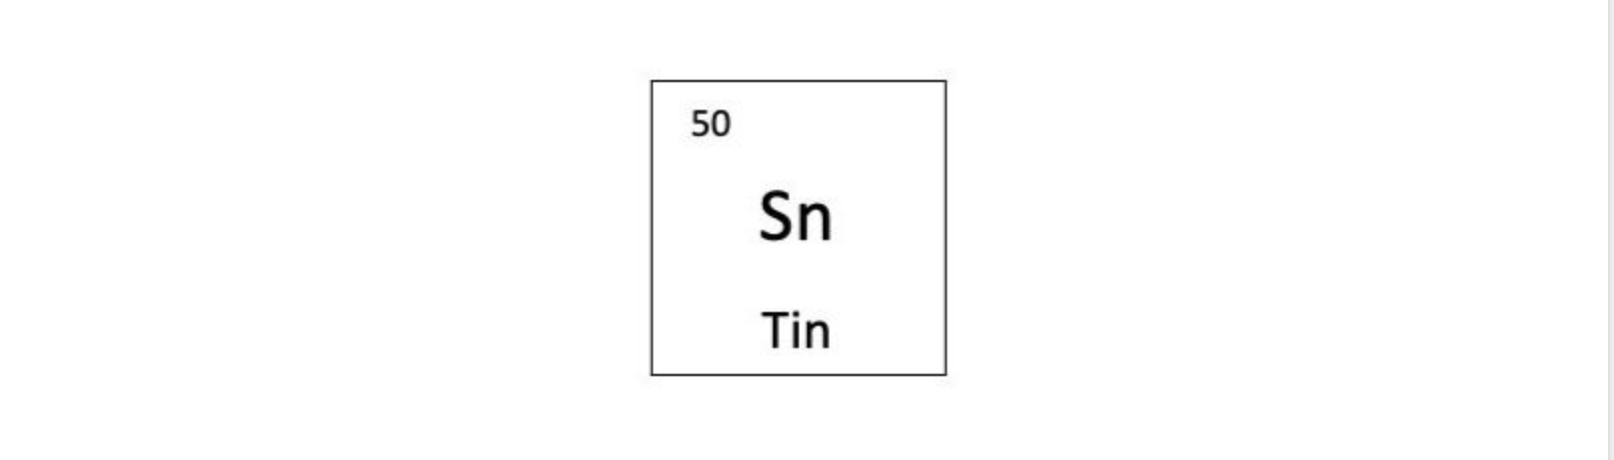 tin (Sn), a chemical element belonging to the carbon family - periodic table